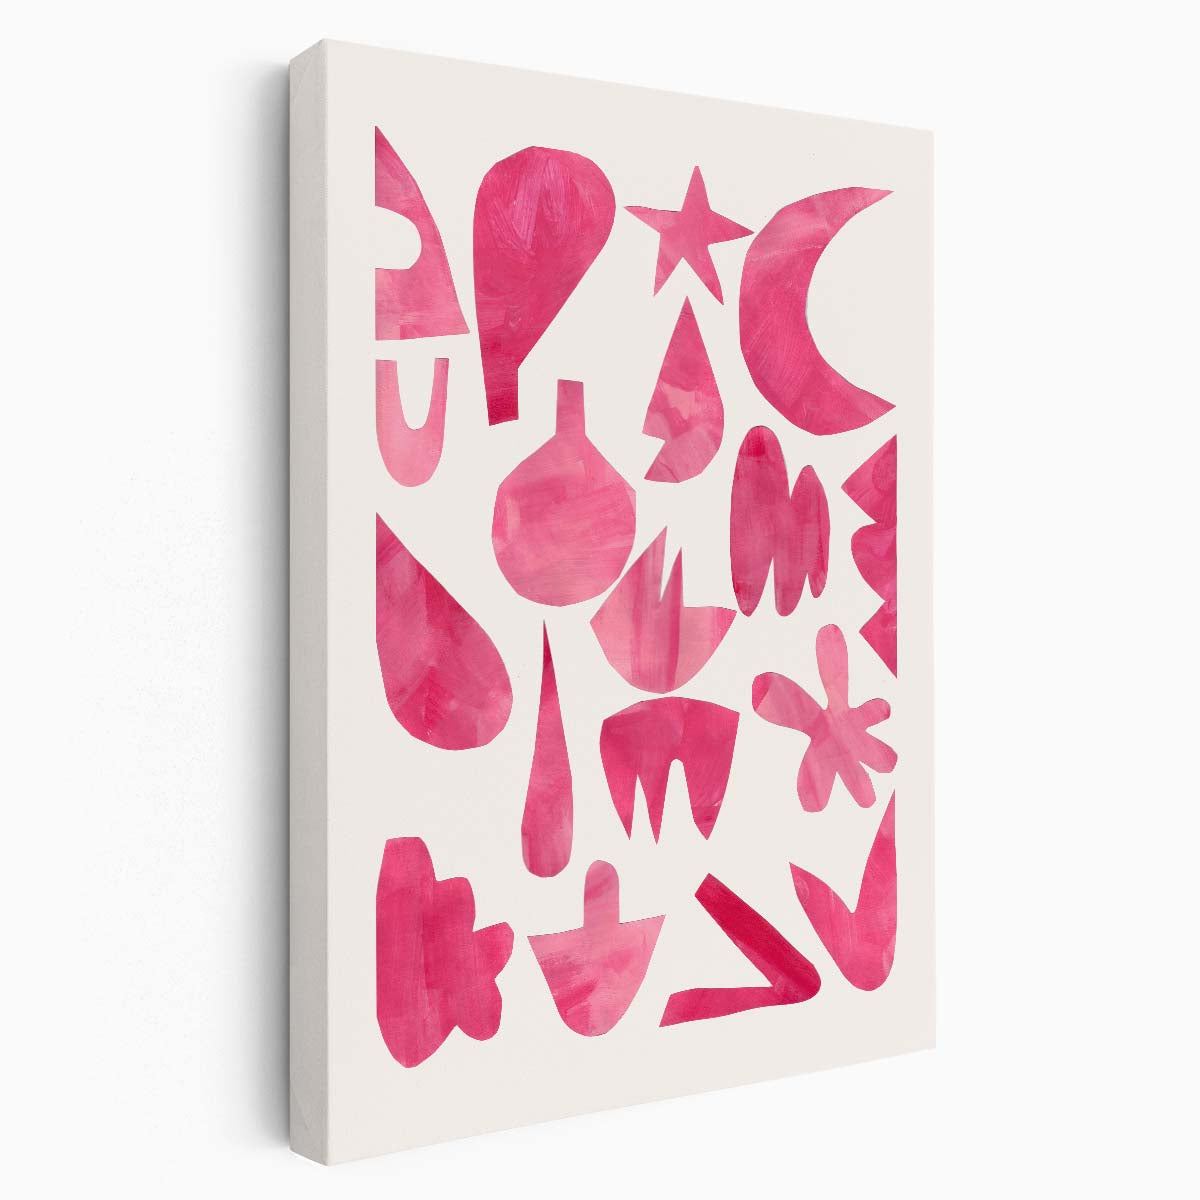 Ejaaz Haniff's Abstract Geometric Illustration Retro Party Art Poster by Luxuriance Designs, made in USA